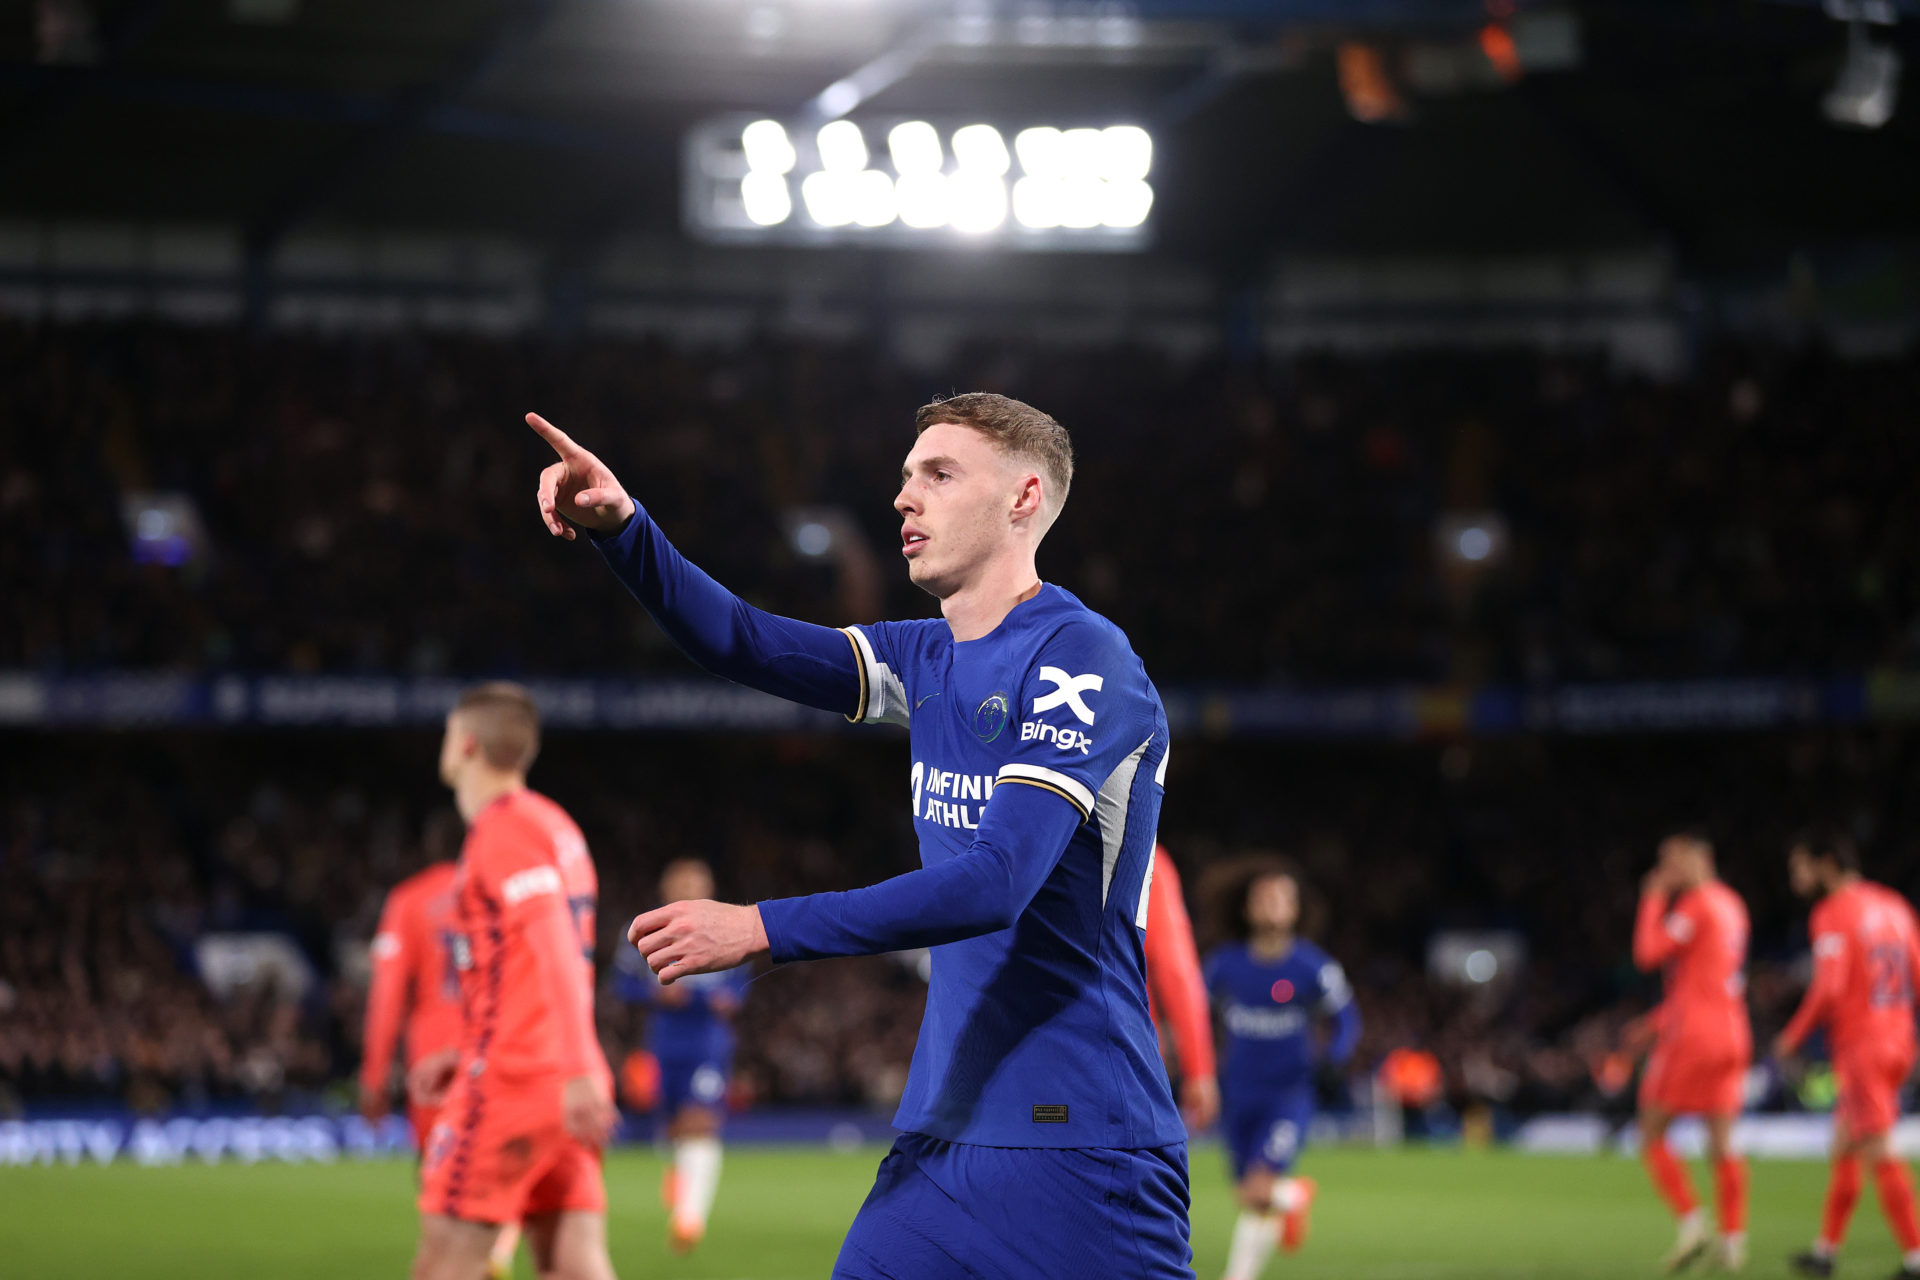 While Cole Palmer will get all the plaudits, 24-year-old deserves credit after Chelsea vs Everton